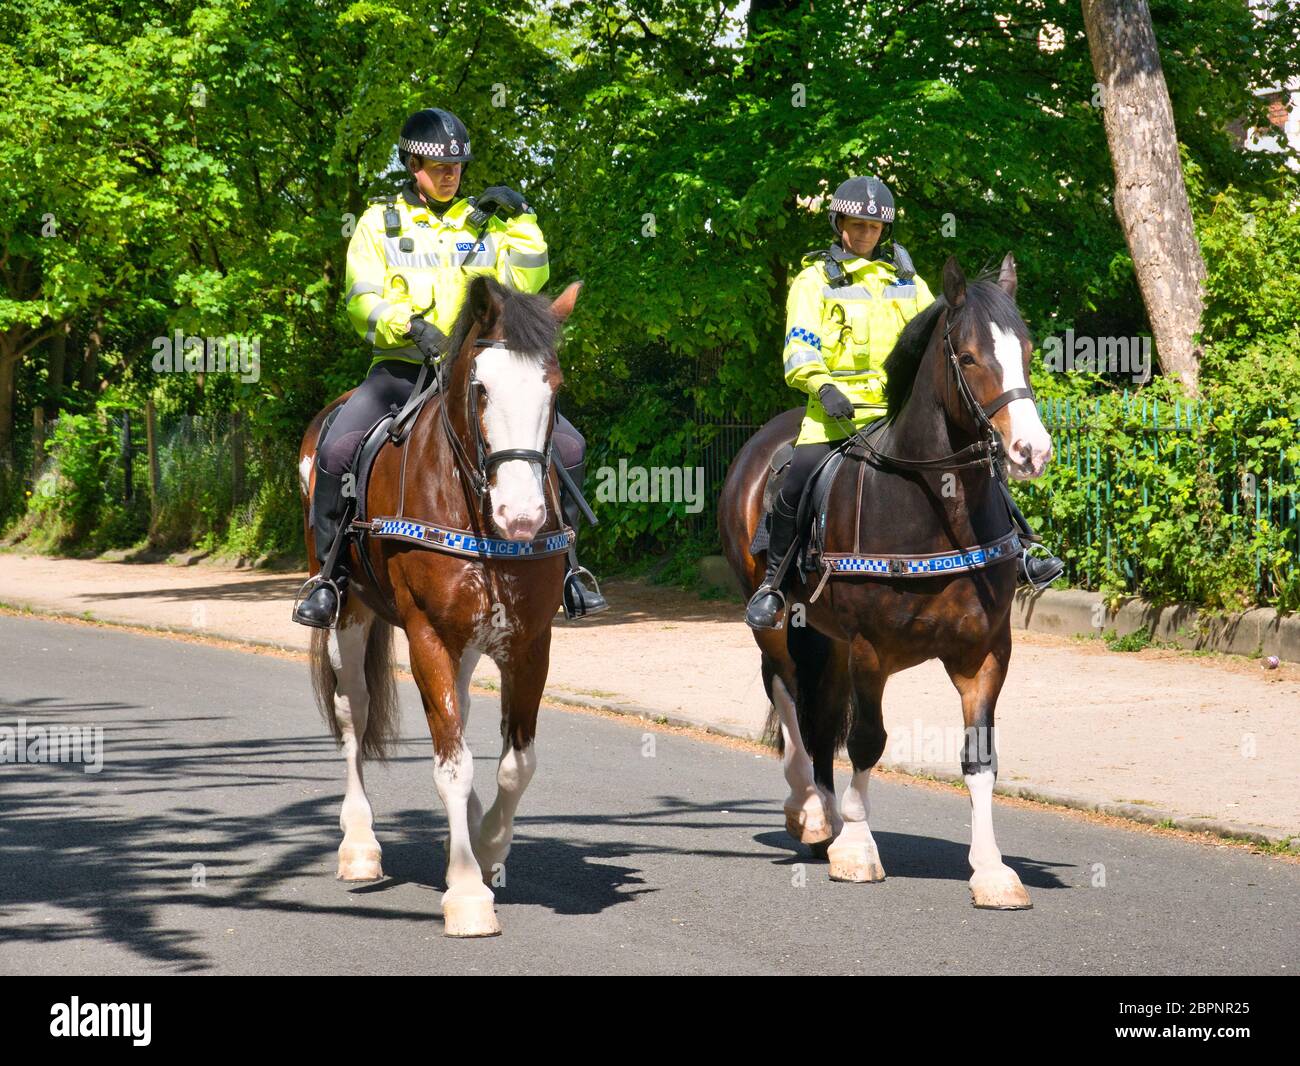 Two mounted police officers in high visibility clothing patrol Birkenhead Park on horseback on a sunny day with green foliage in the background. Stock Photo